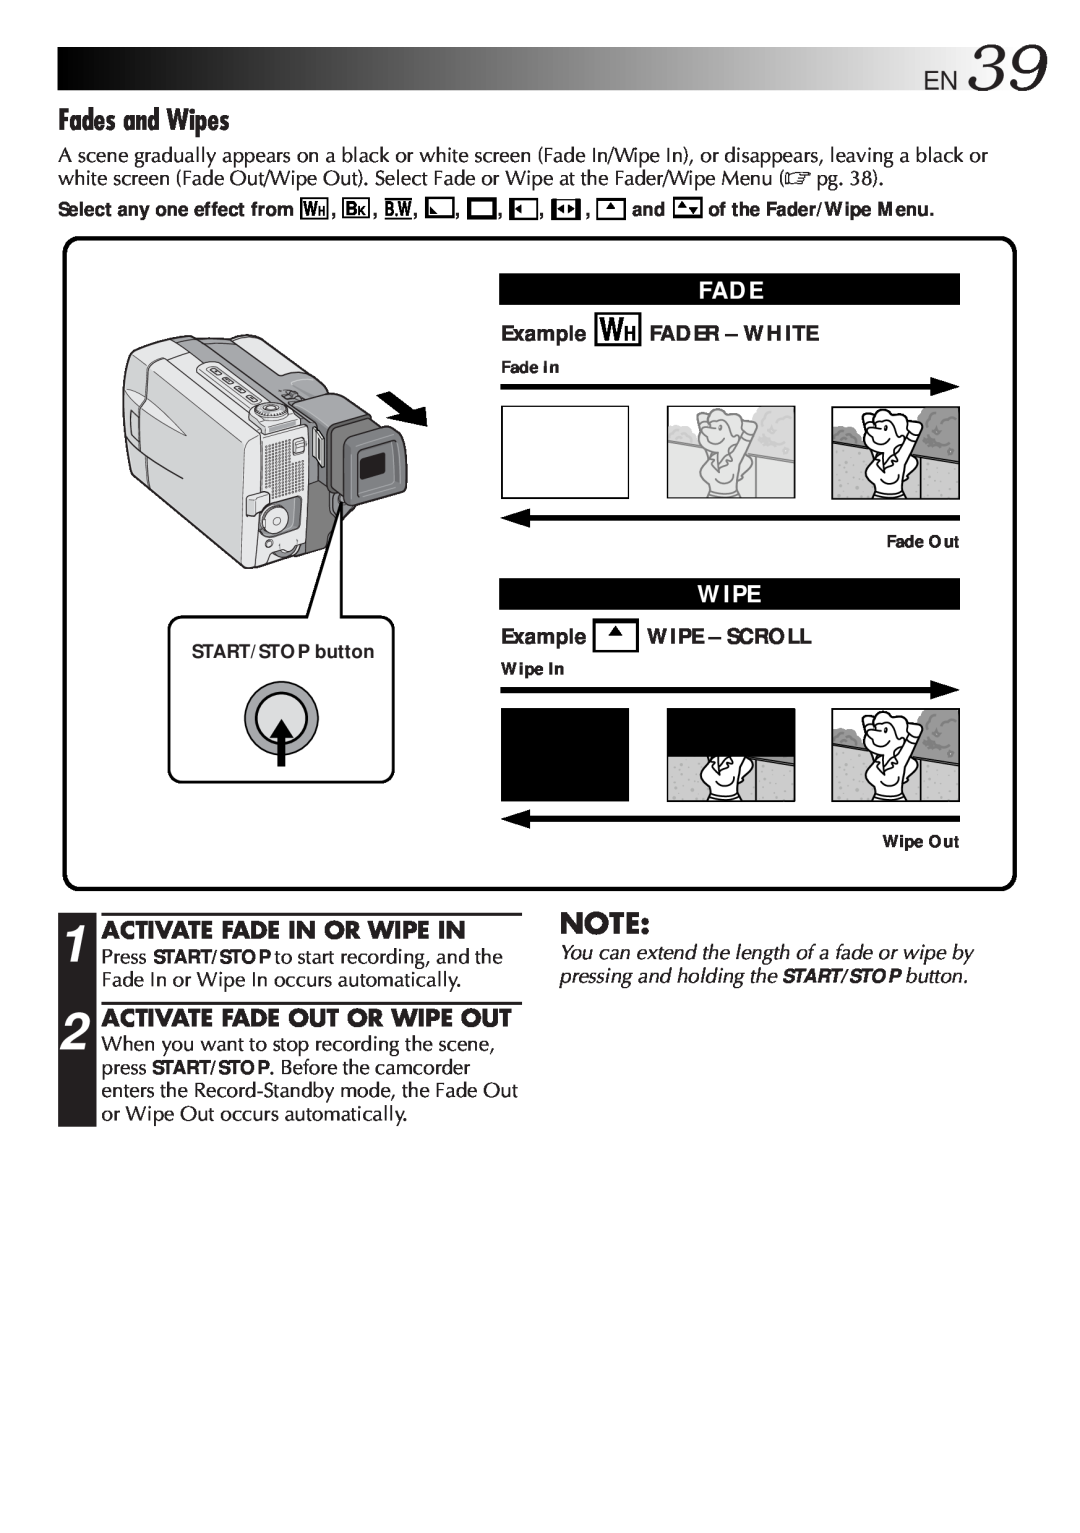 JVC GR-DVL9000 manual Fades and Wipes, EN39, Fader – White, Example WIPE – SCROLL 